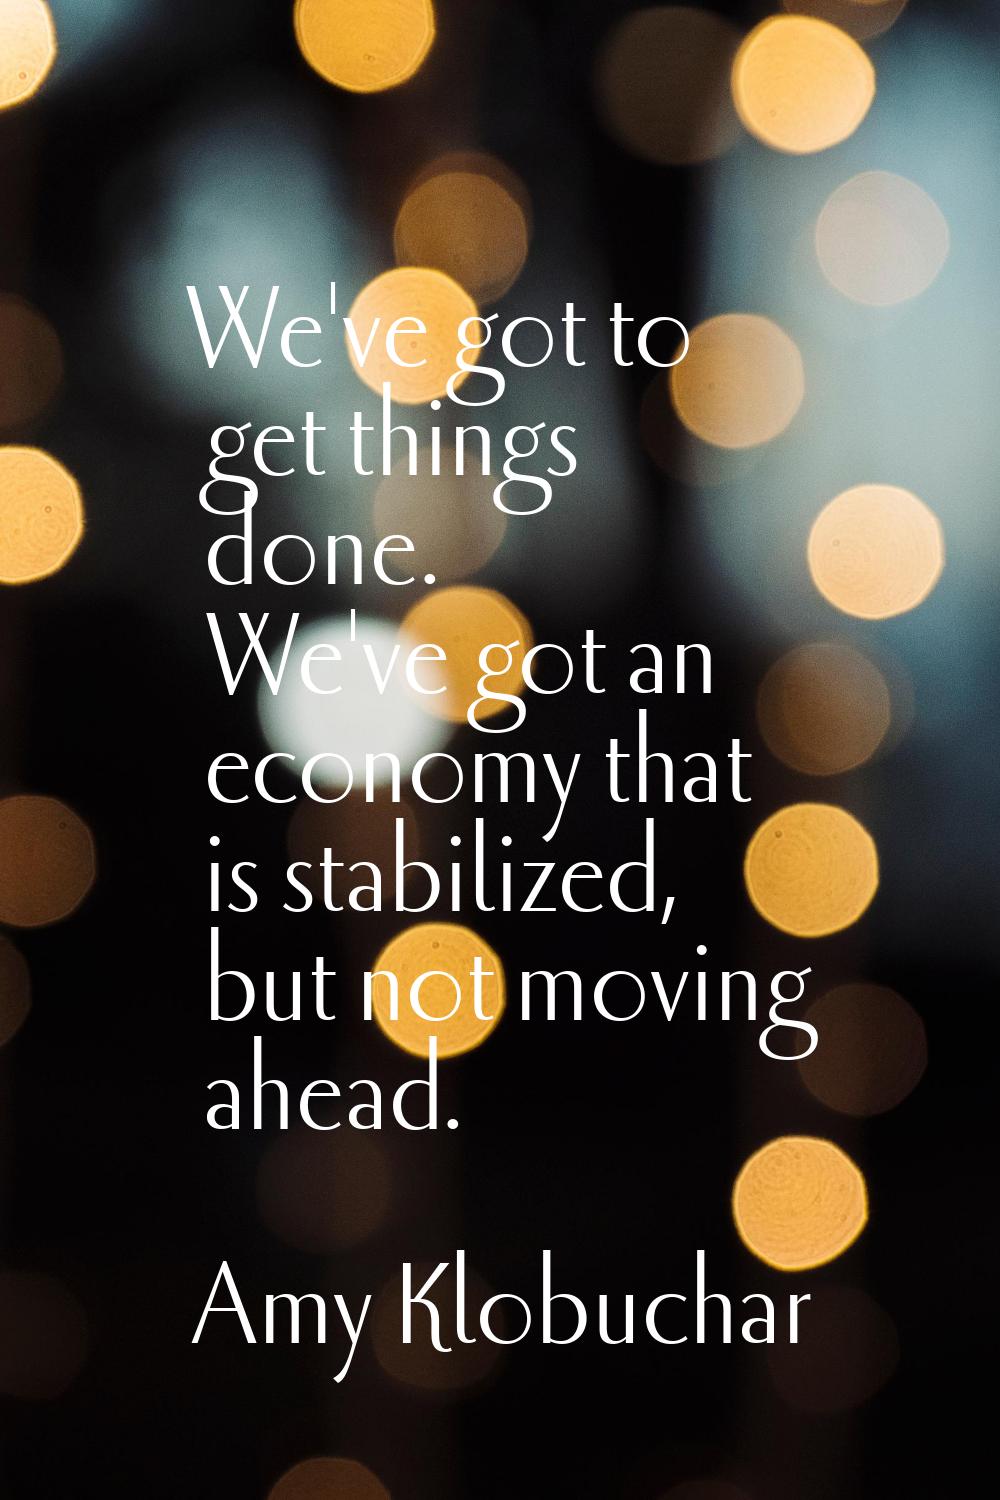 We've got to get things done. We've got an economy that is stabilized, but not moving ahead.